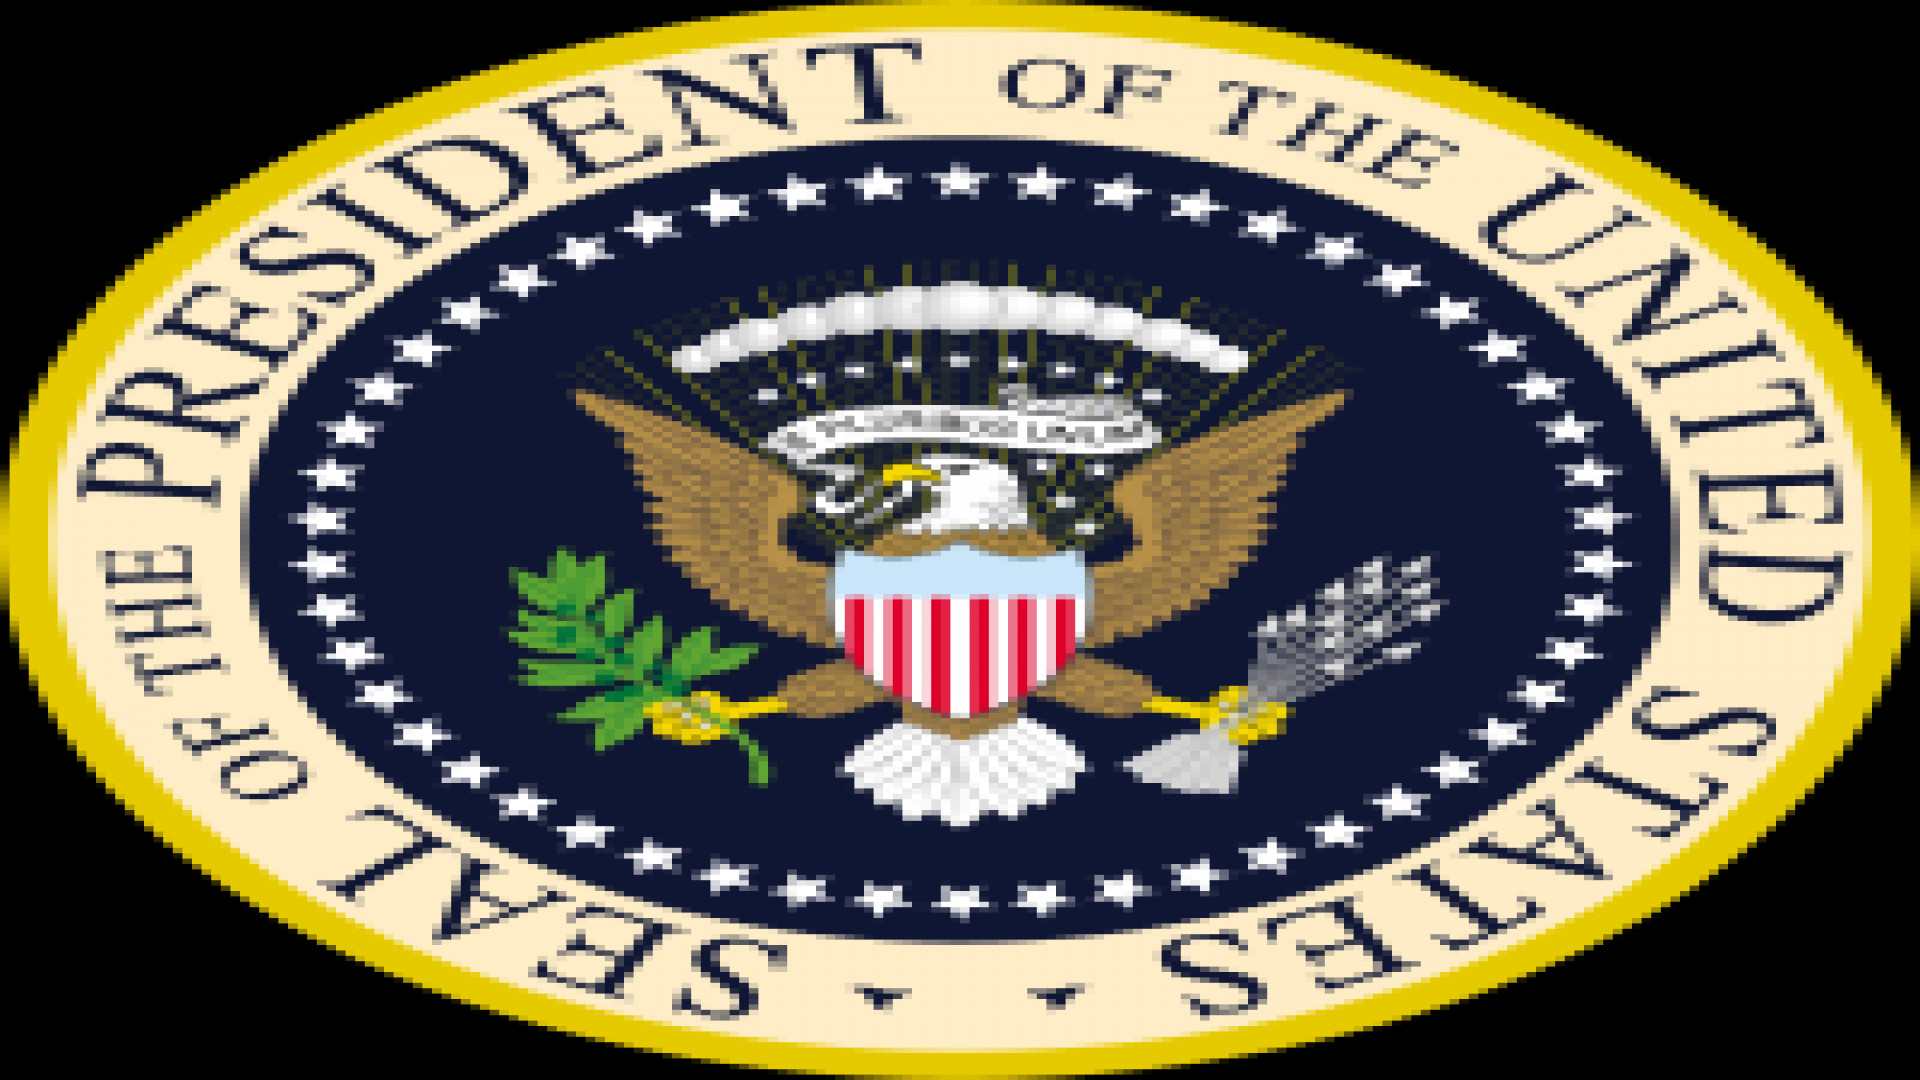 1920x1080, 19, 12, - Resident Of The United States Seal - HD Wallpaper 